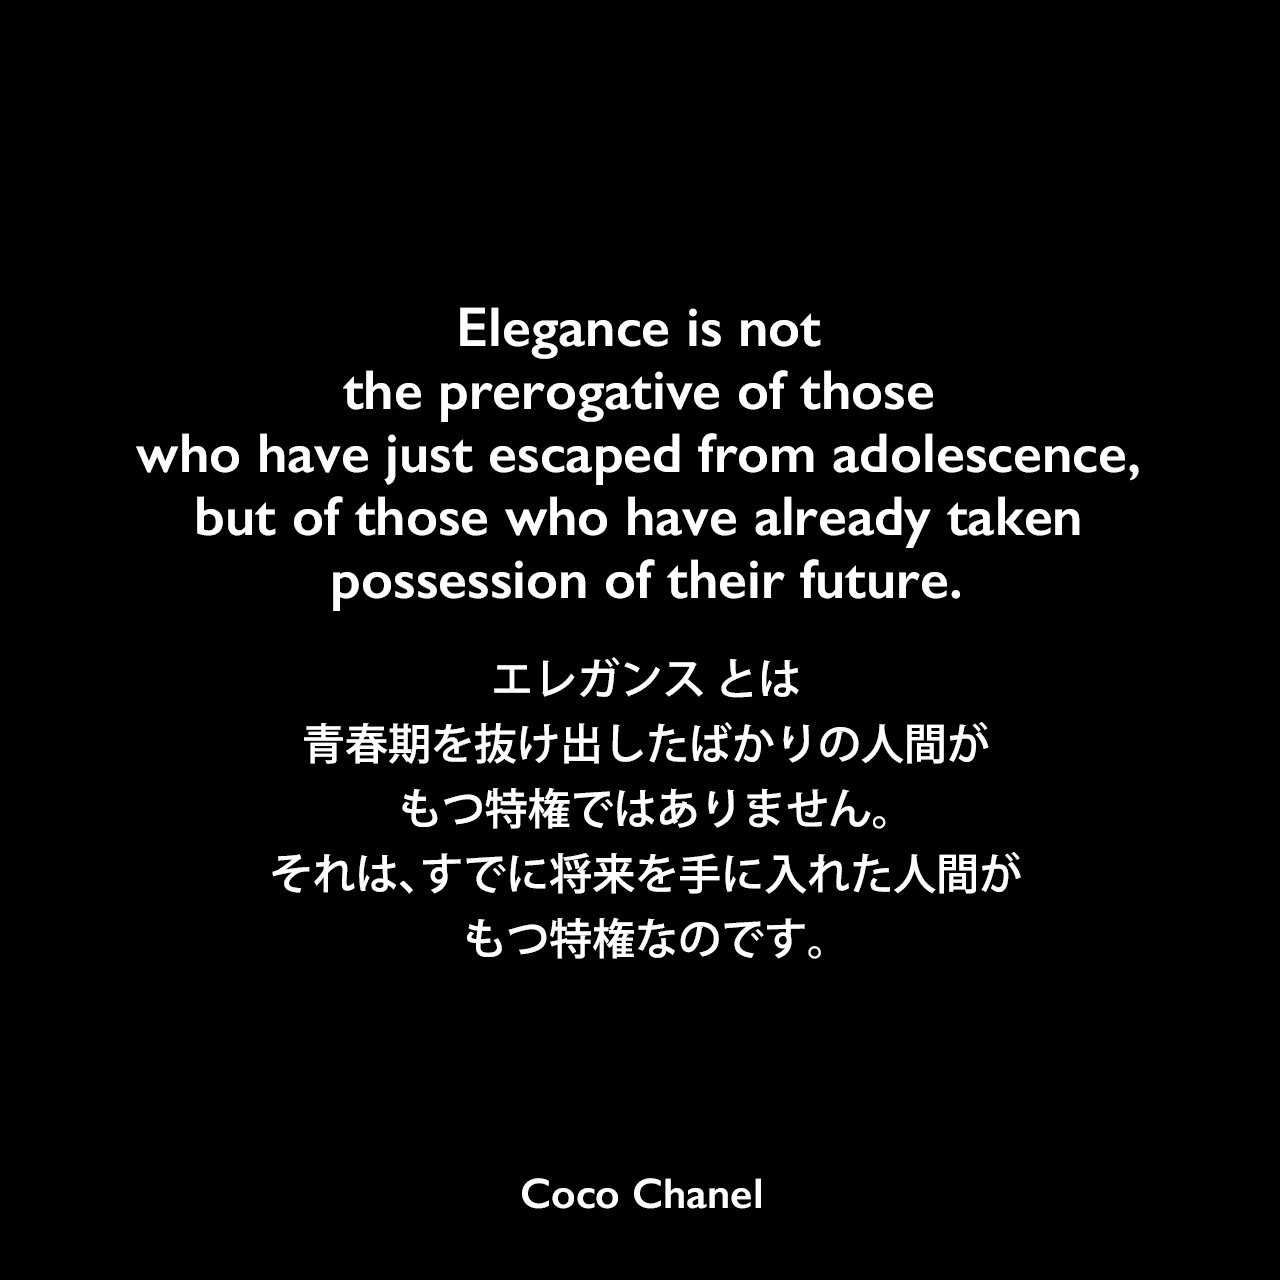 Elegance is not the prerogative of those who have just escaped from adolescence, but of those who have already taken possession of their future.エレガンス とは、青春期を抜け出したばかりの人間がもつ特権ではありません。それは、すでに将来を手に入れた人間がもつ特権なのです。Coco Chanel